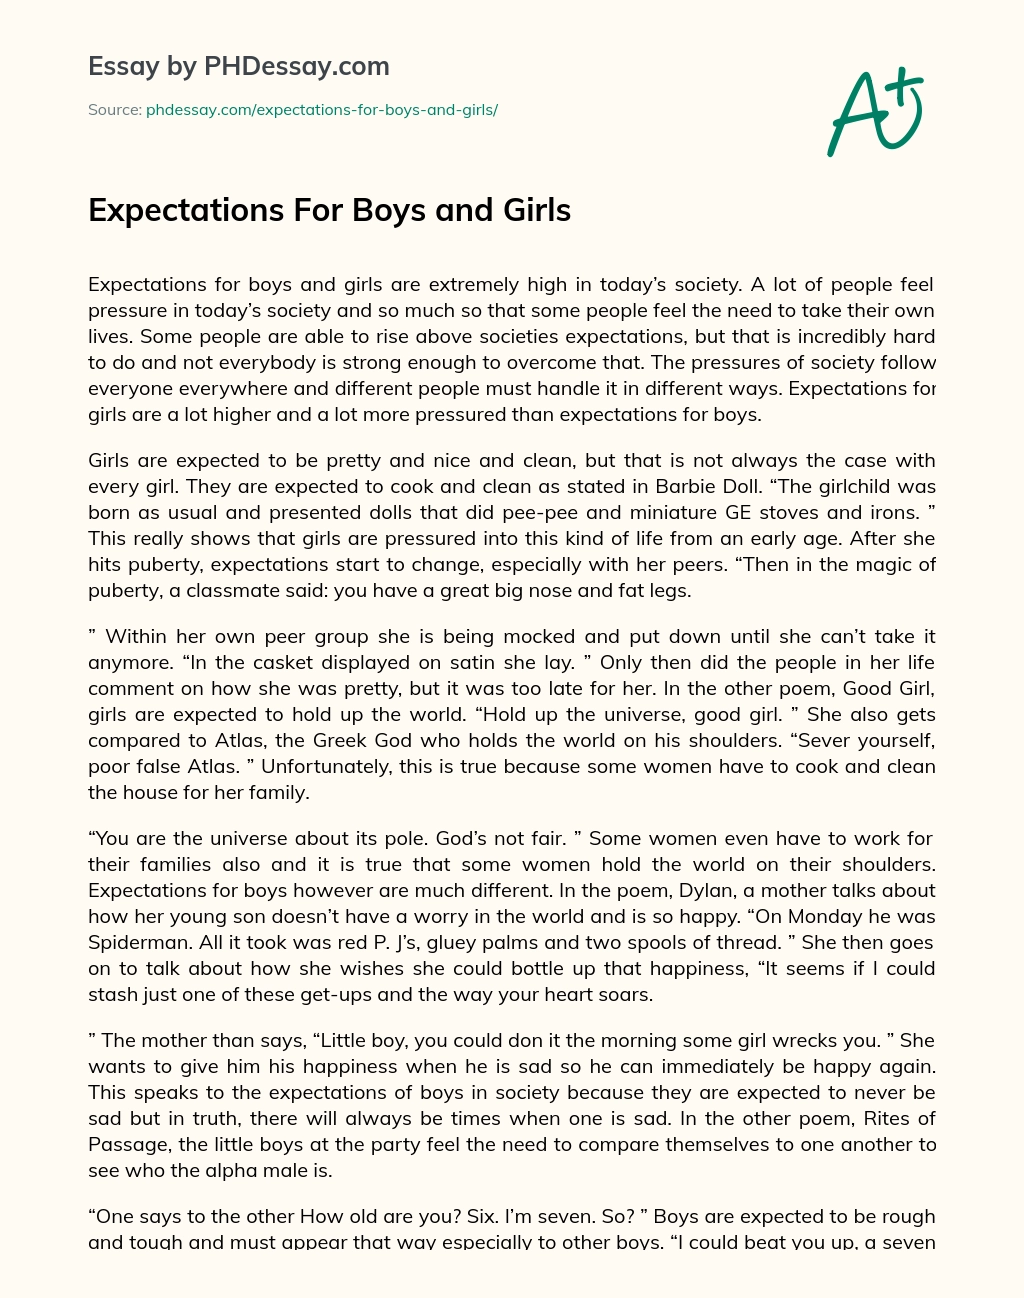 Expectations For Boys and Girls essay